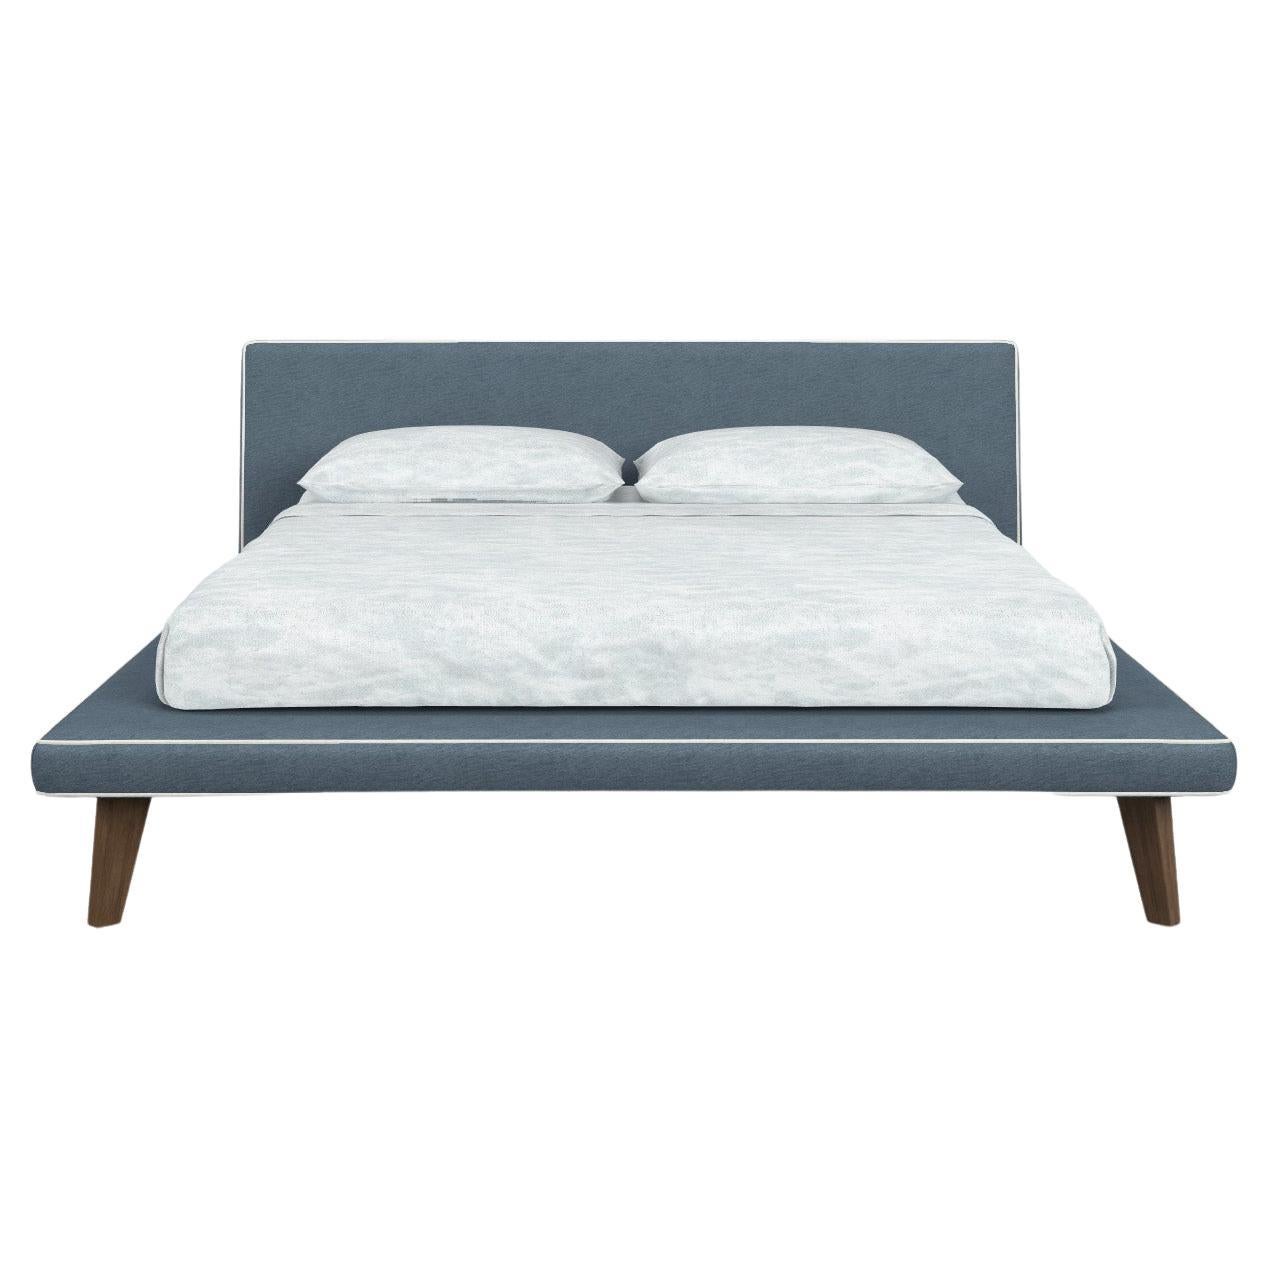 Gervasoni Tray Q Bed in Munch Upholstery & Walnut Feet by Paola Navone